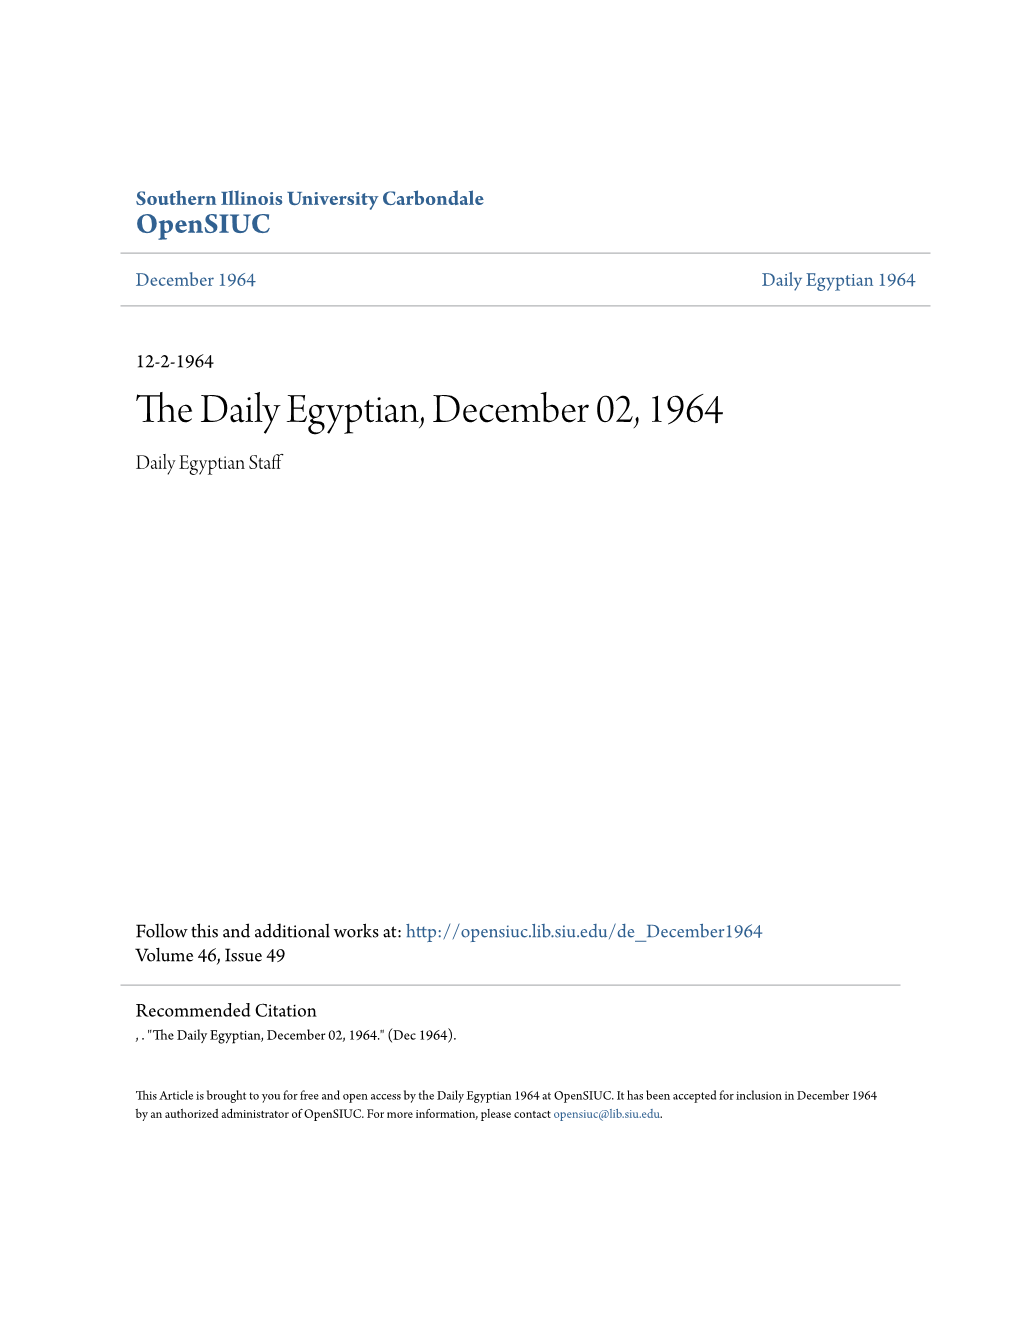 The Daily Egyptian, December 02, 1964